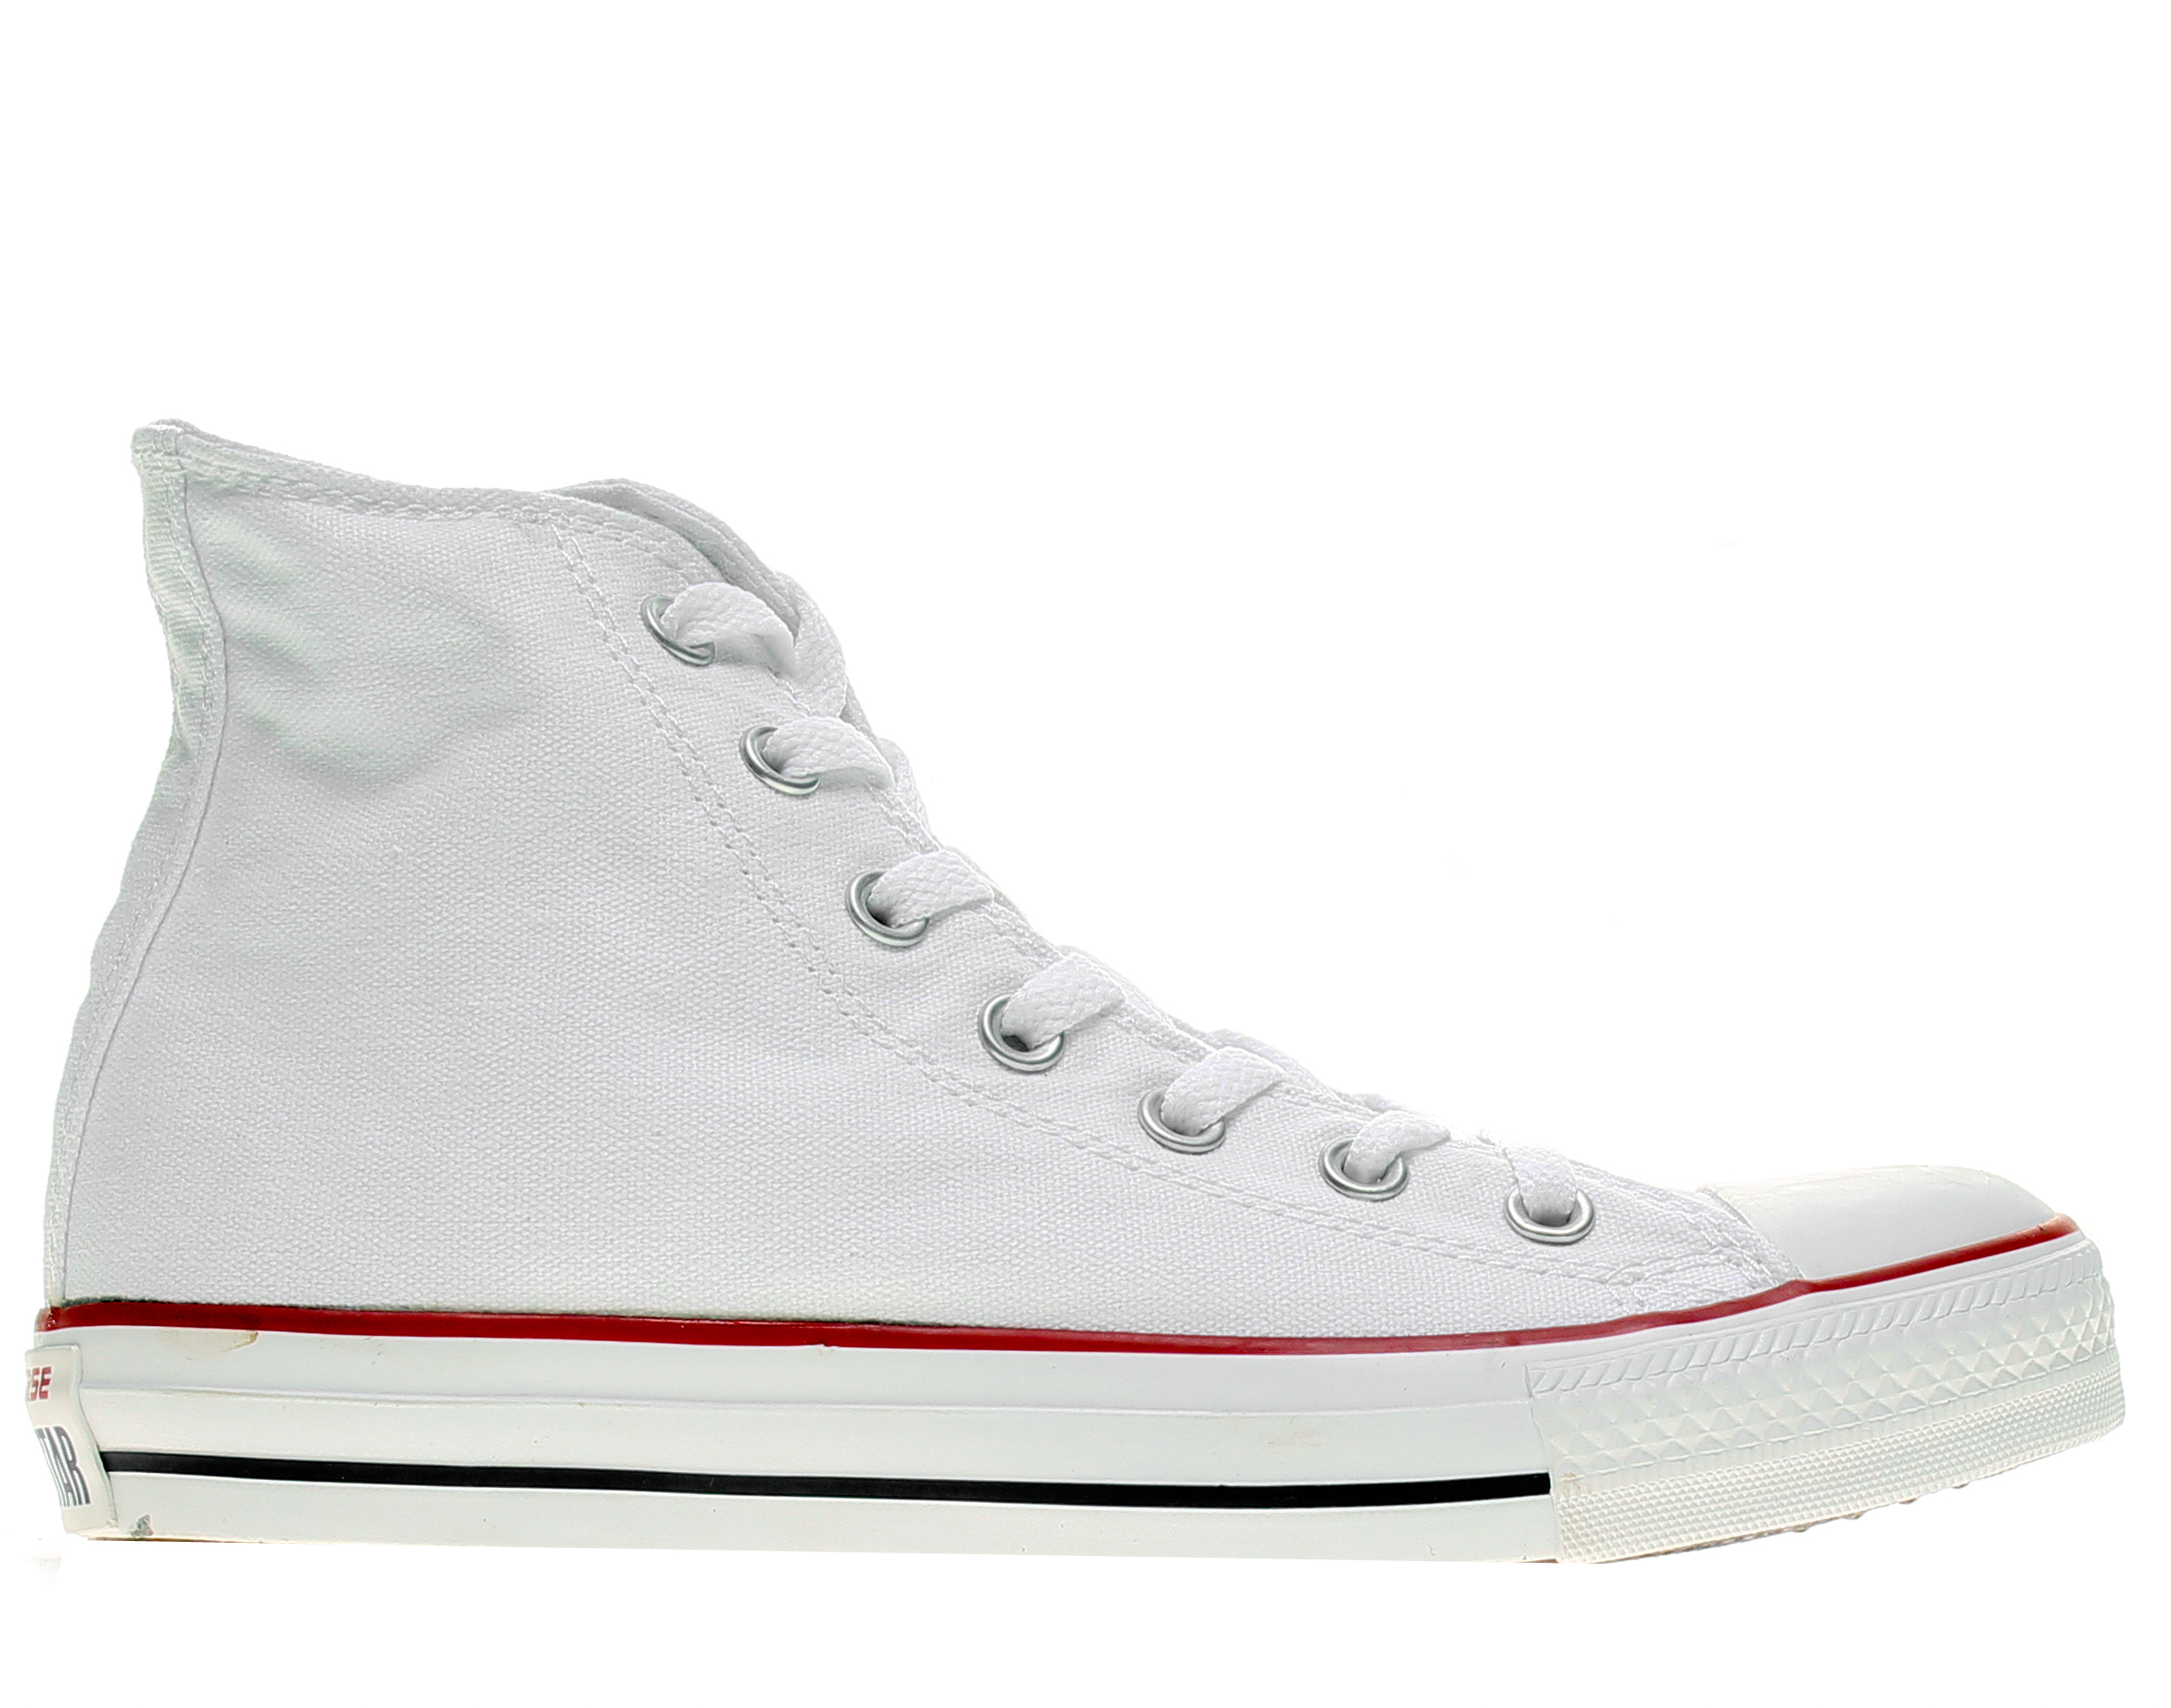 Converse Unisex Chuck Taylor All Star High Top - image 2 of 6